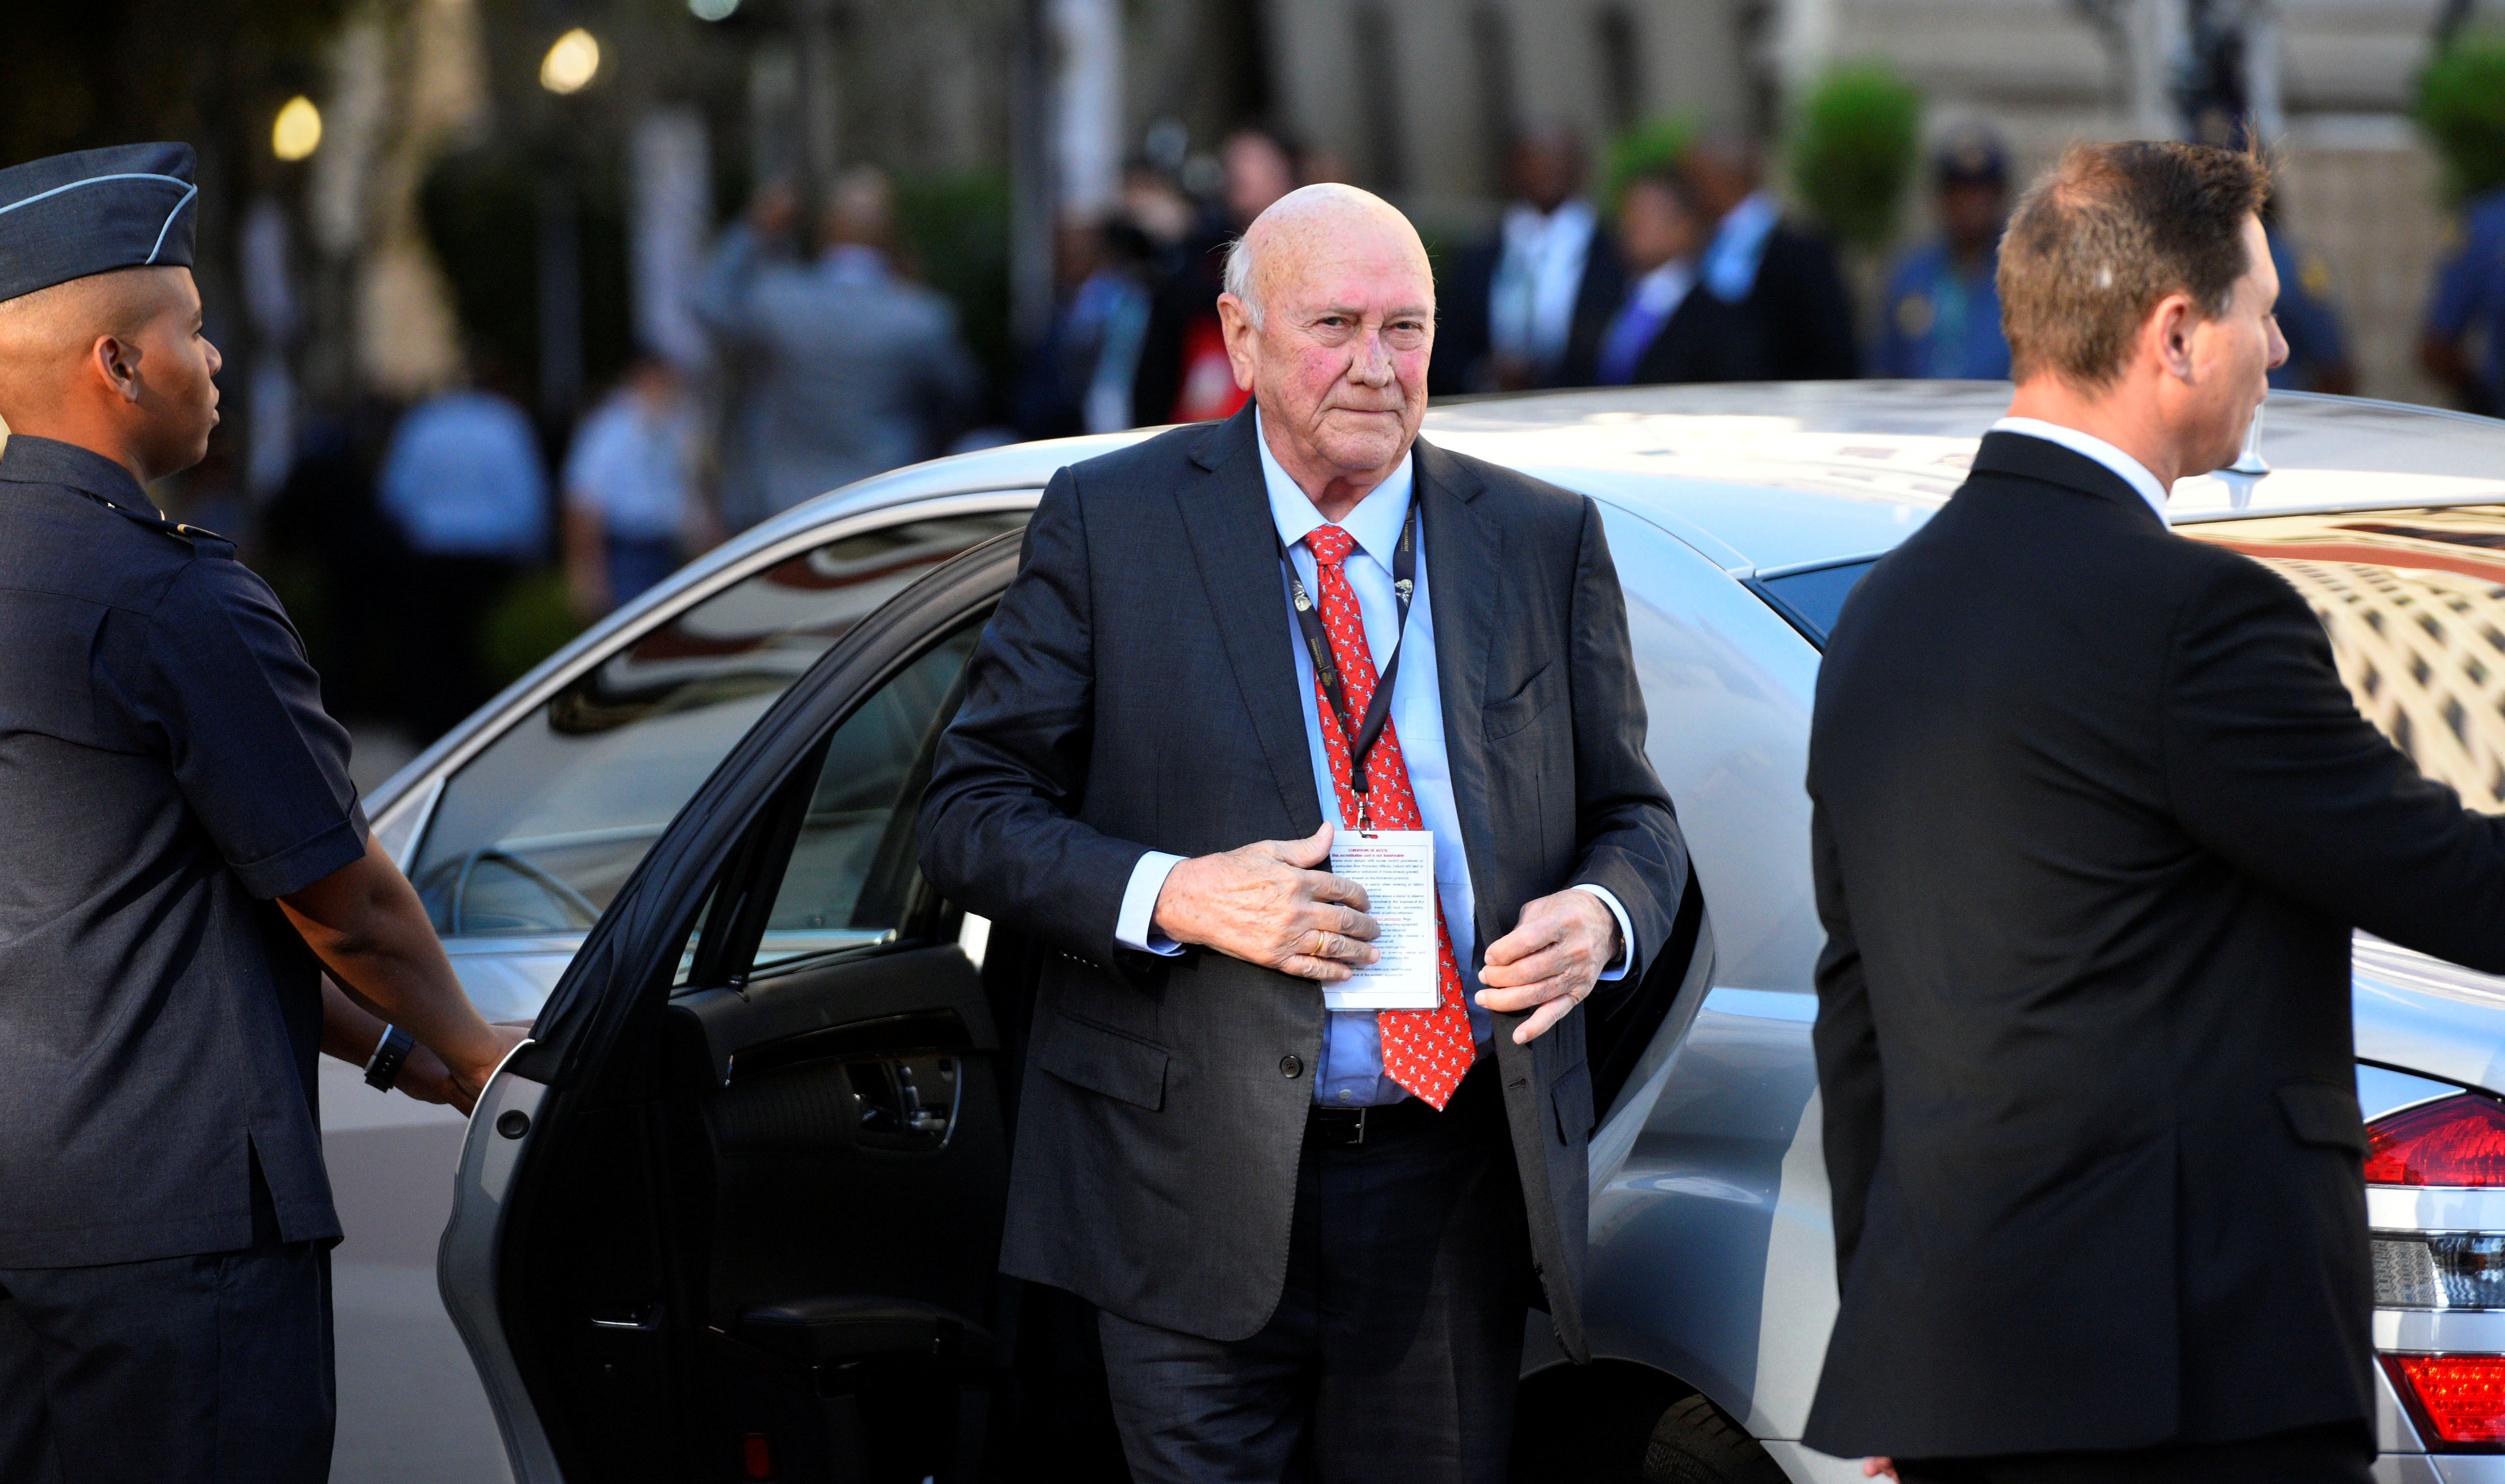 Former South African President FW De Klerk arrives to attend President Cyril Ramaphosa's State of the Nation address at parliament in Cape Town, South Africa